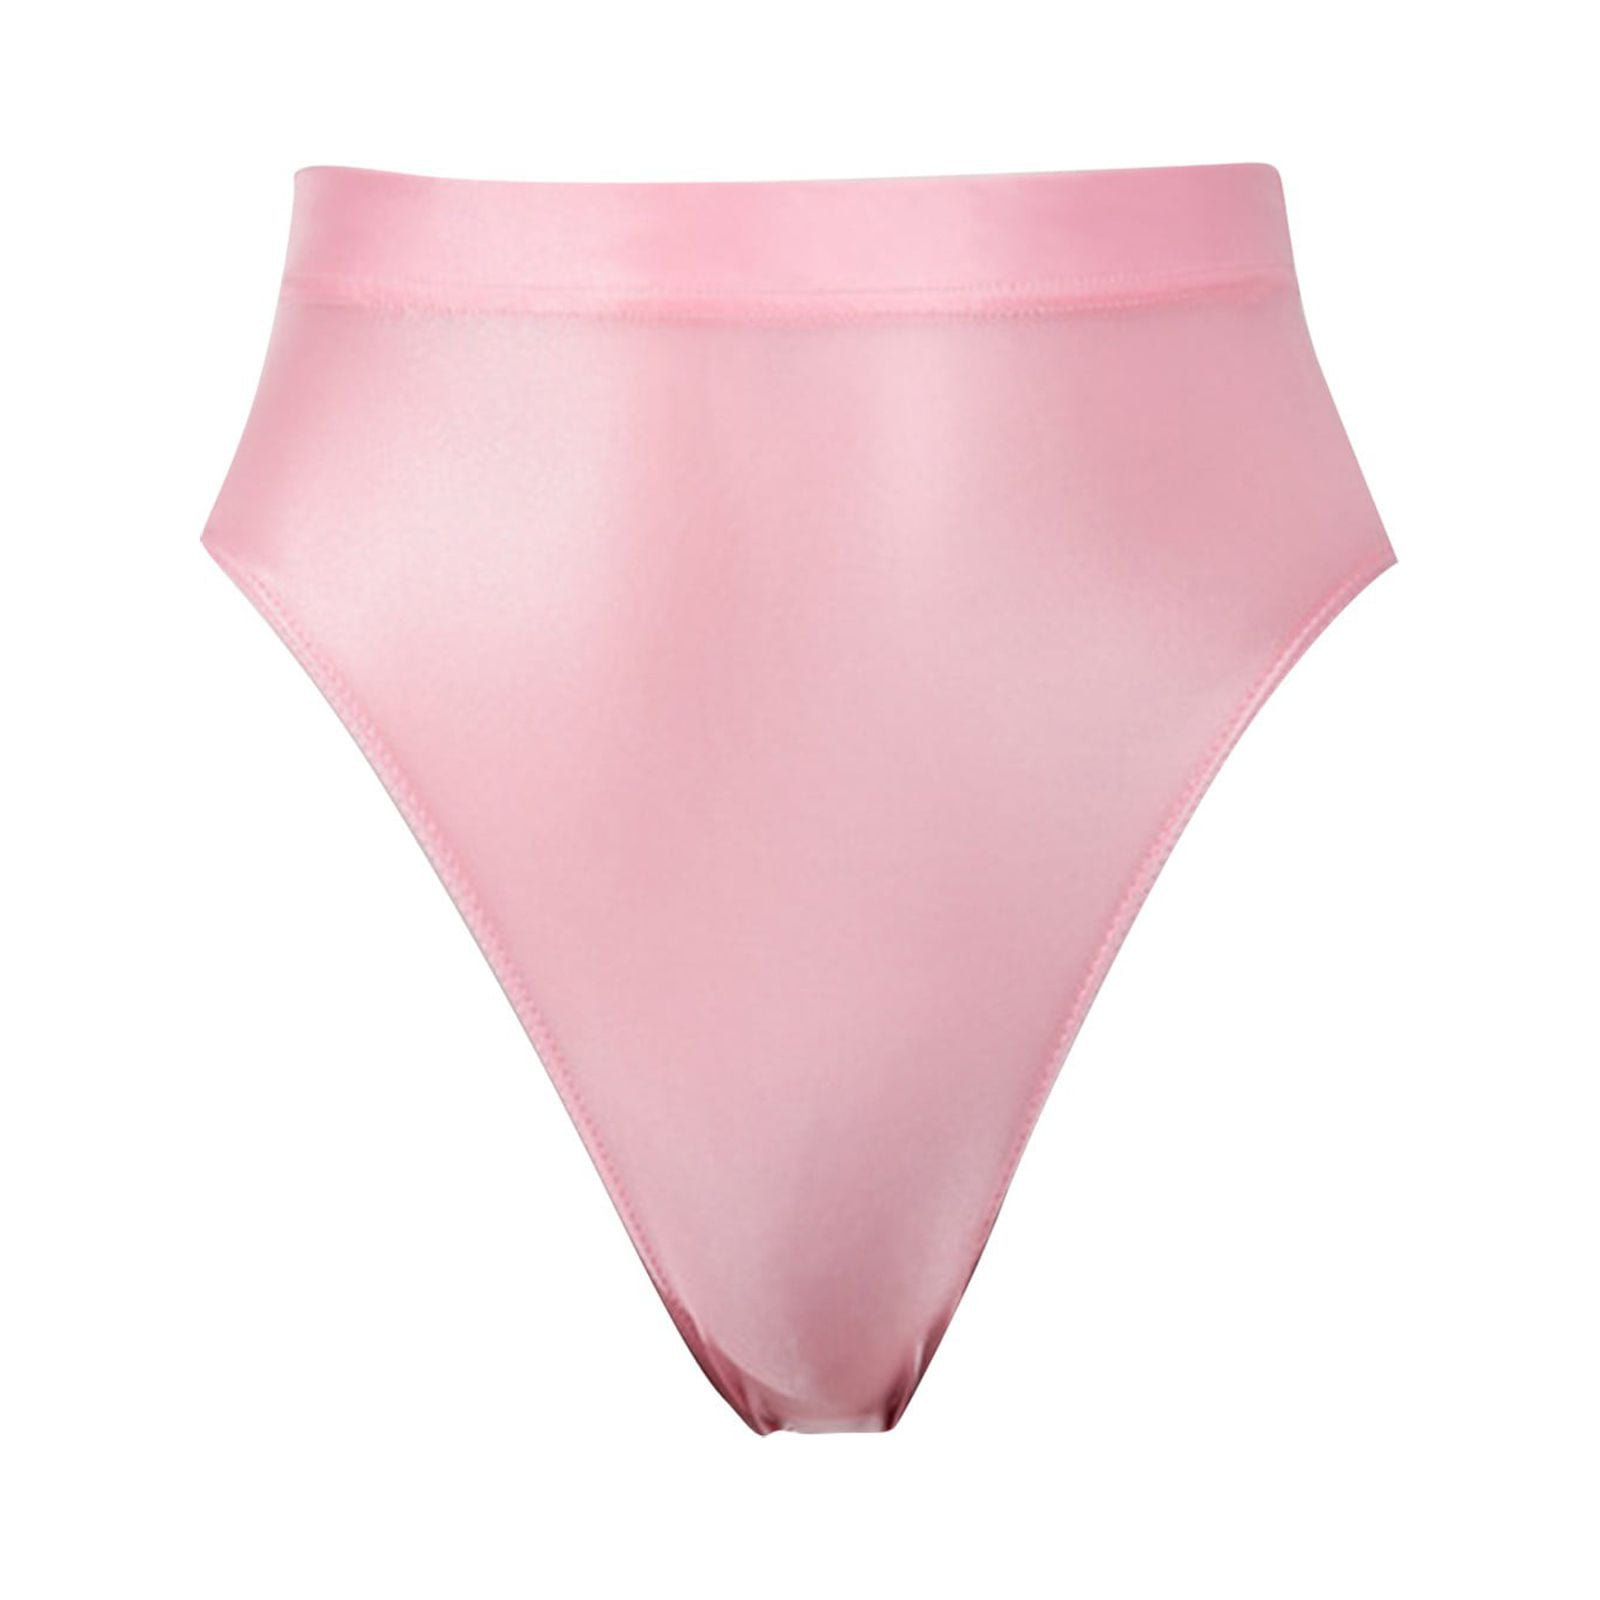 Buy AMYDA Women's Pink Seamless Wire-Free Stretchable Comfortable